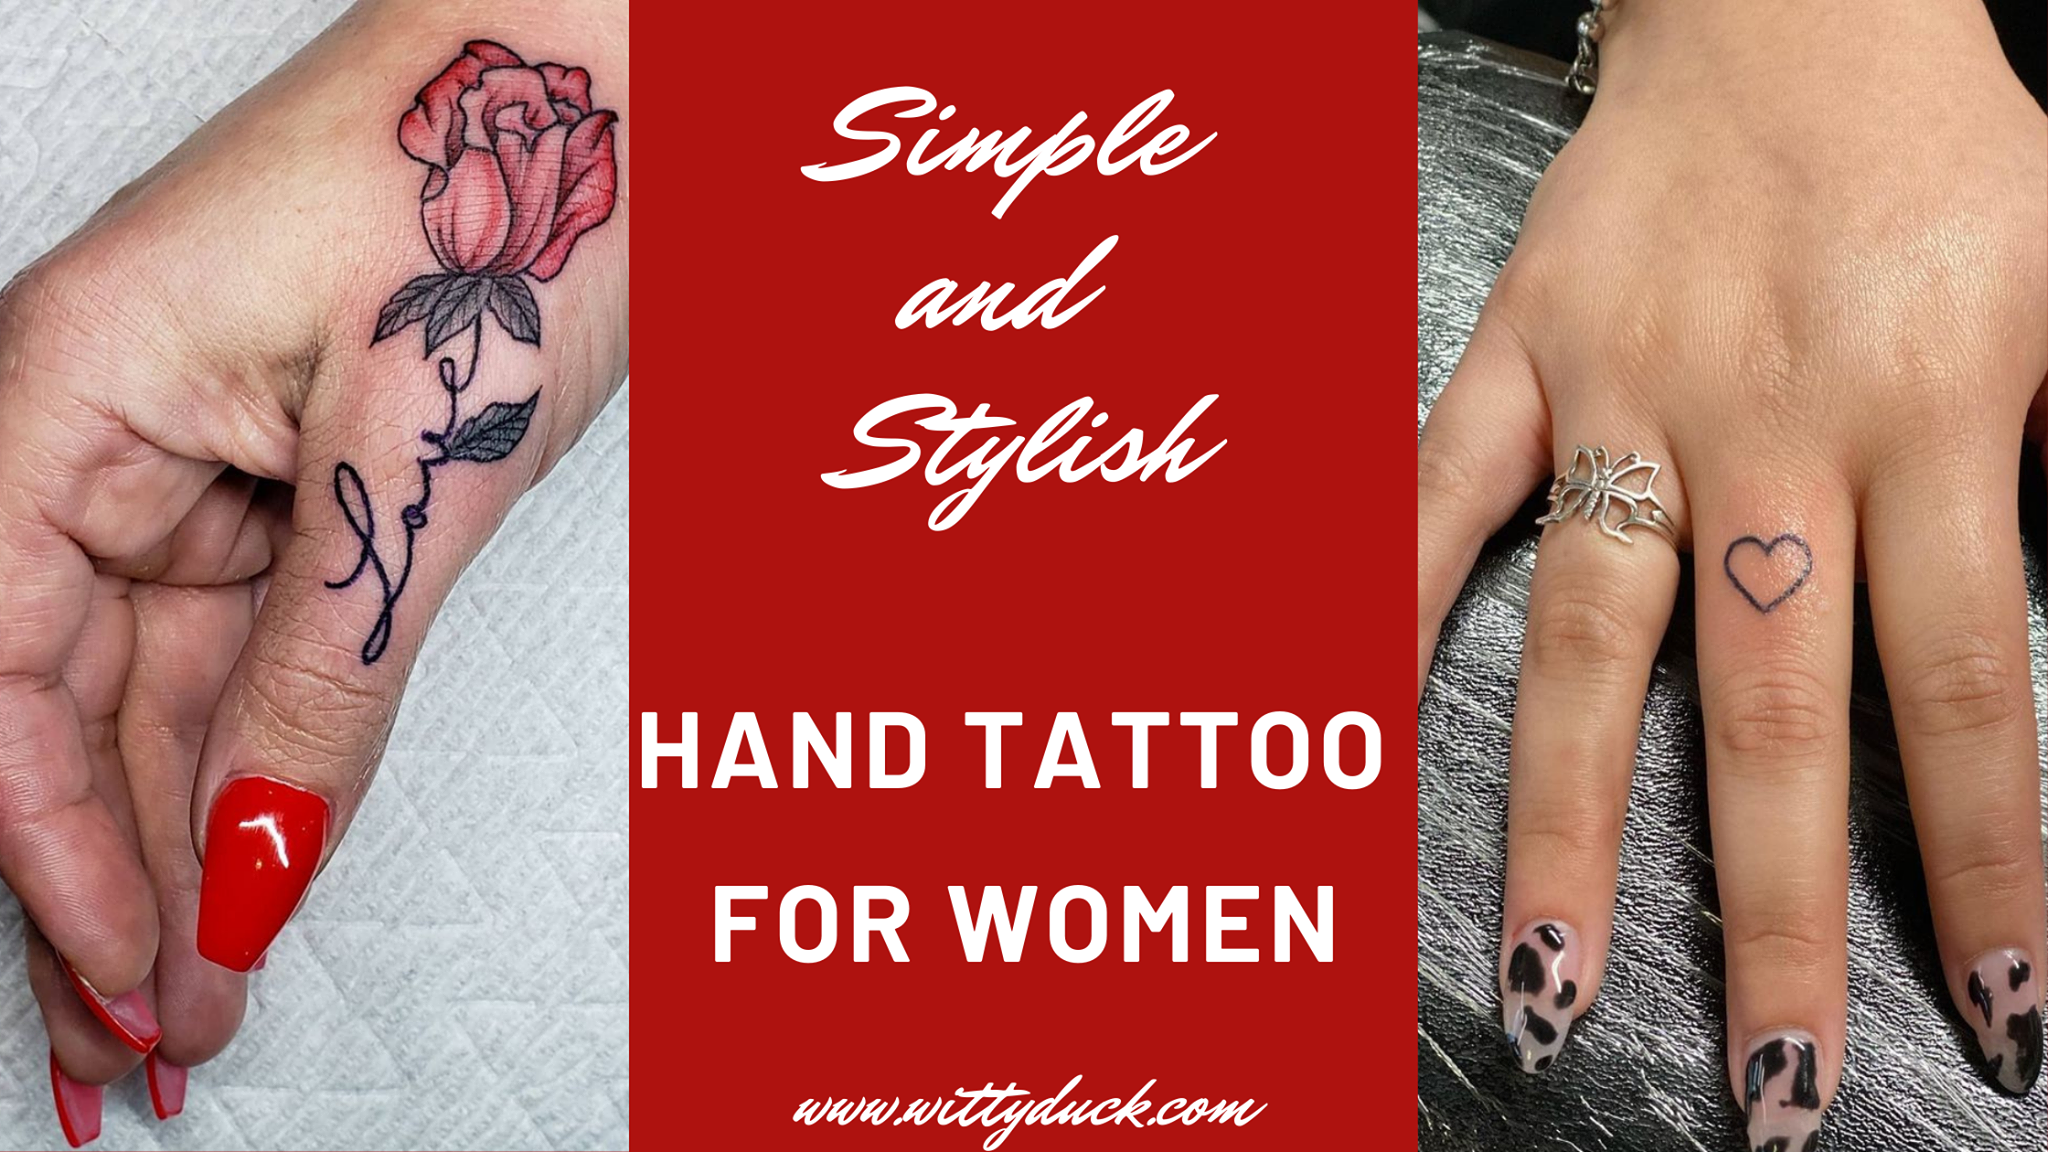 32 Hand Tattoo Ideas for Every Personality Type  Tattoos Body art tattoos  Hand tattoos